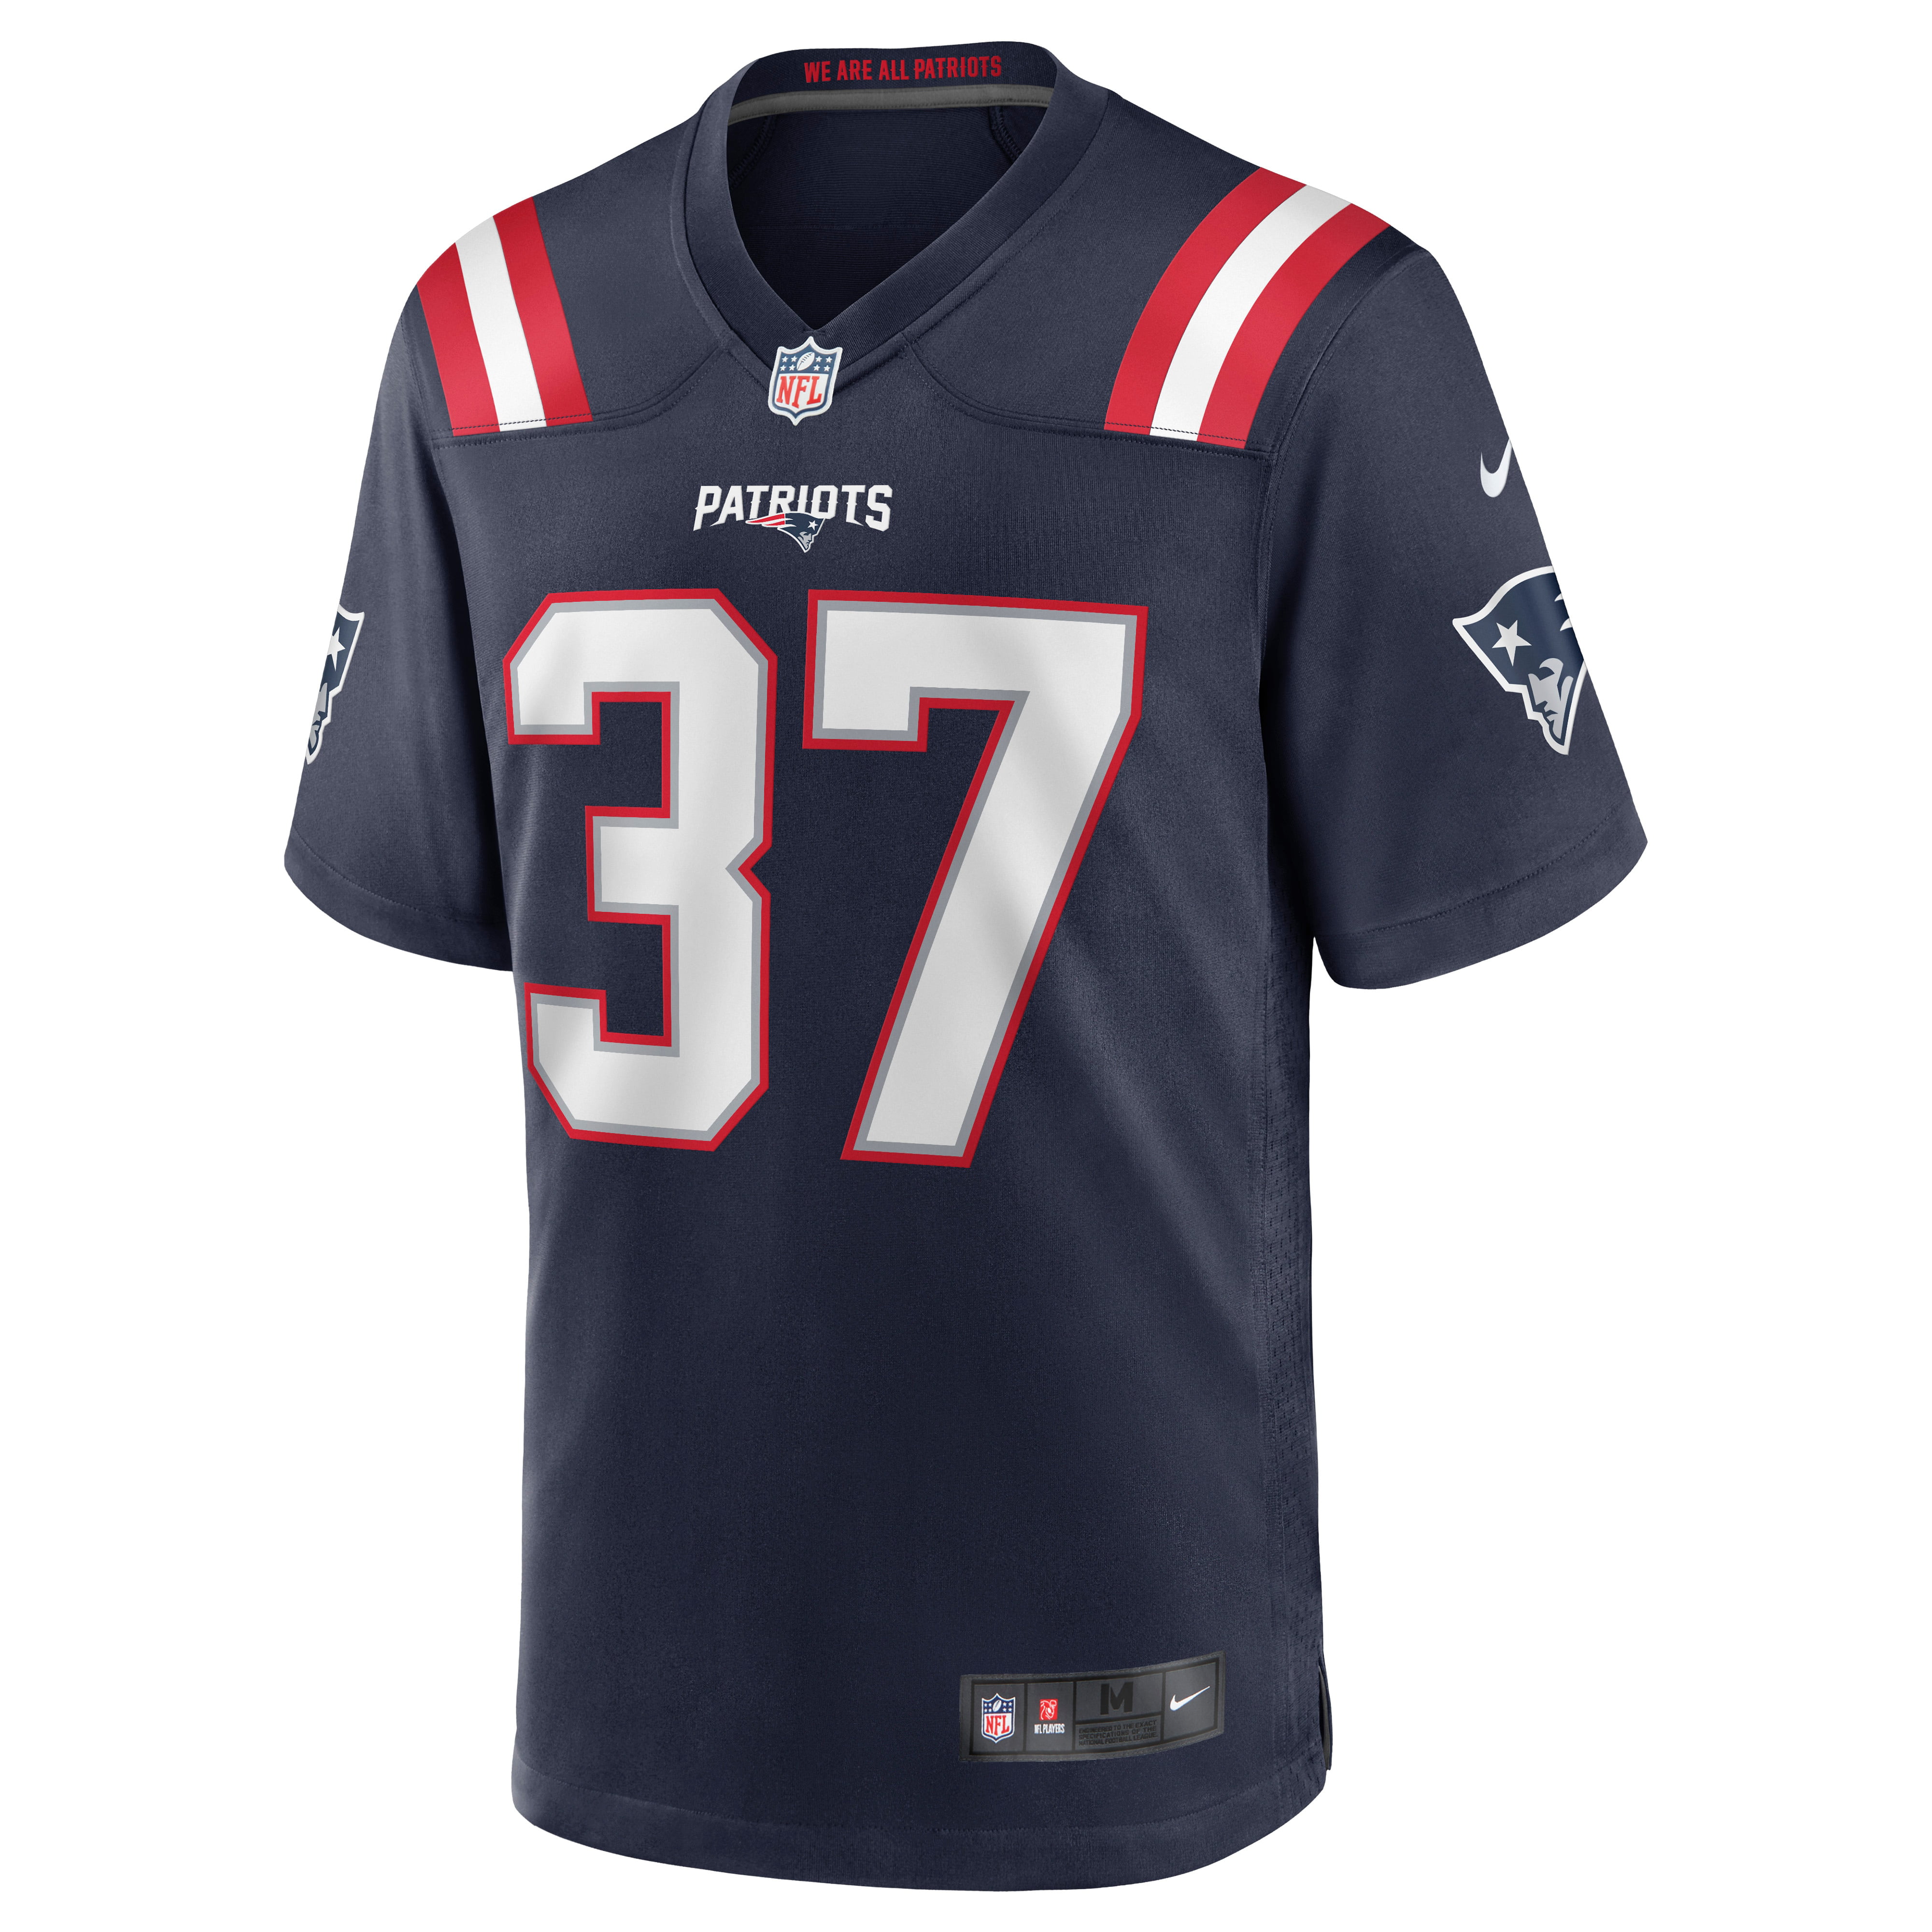 patriots jersey for cheap